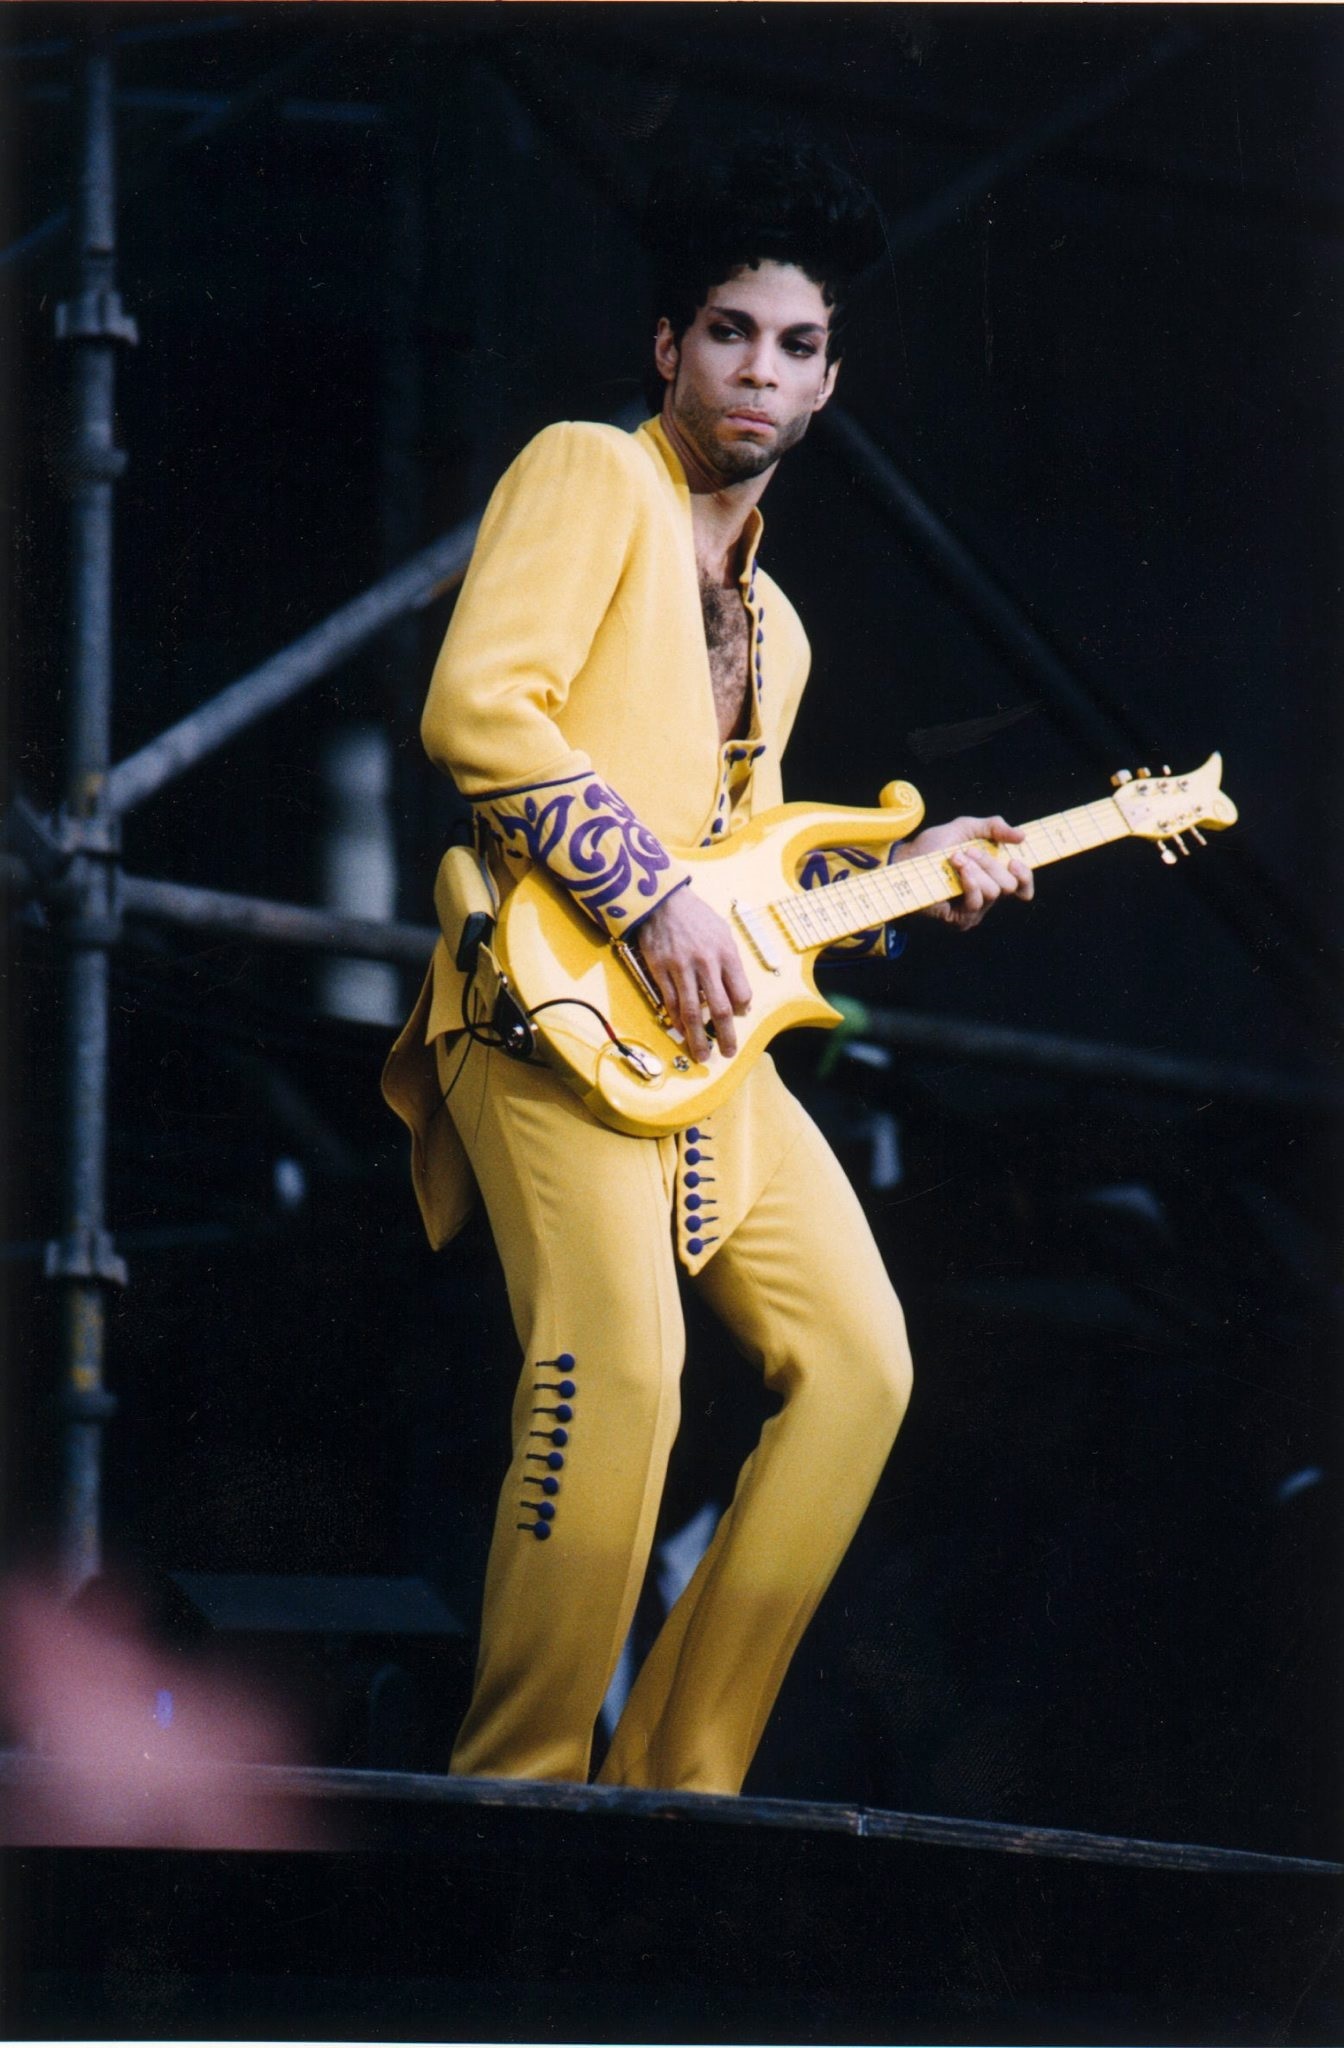 The Artist Formerly Known As Prince back in the 90s.